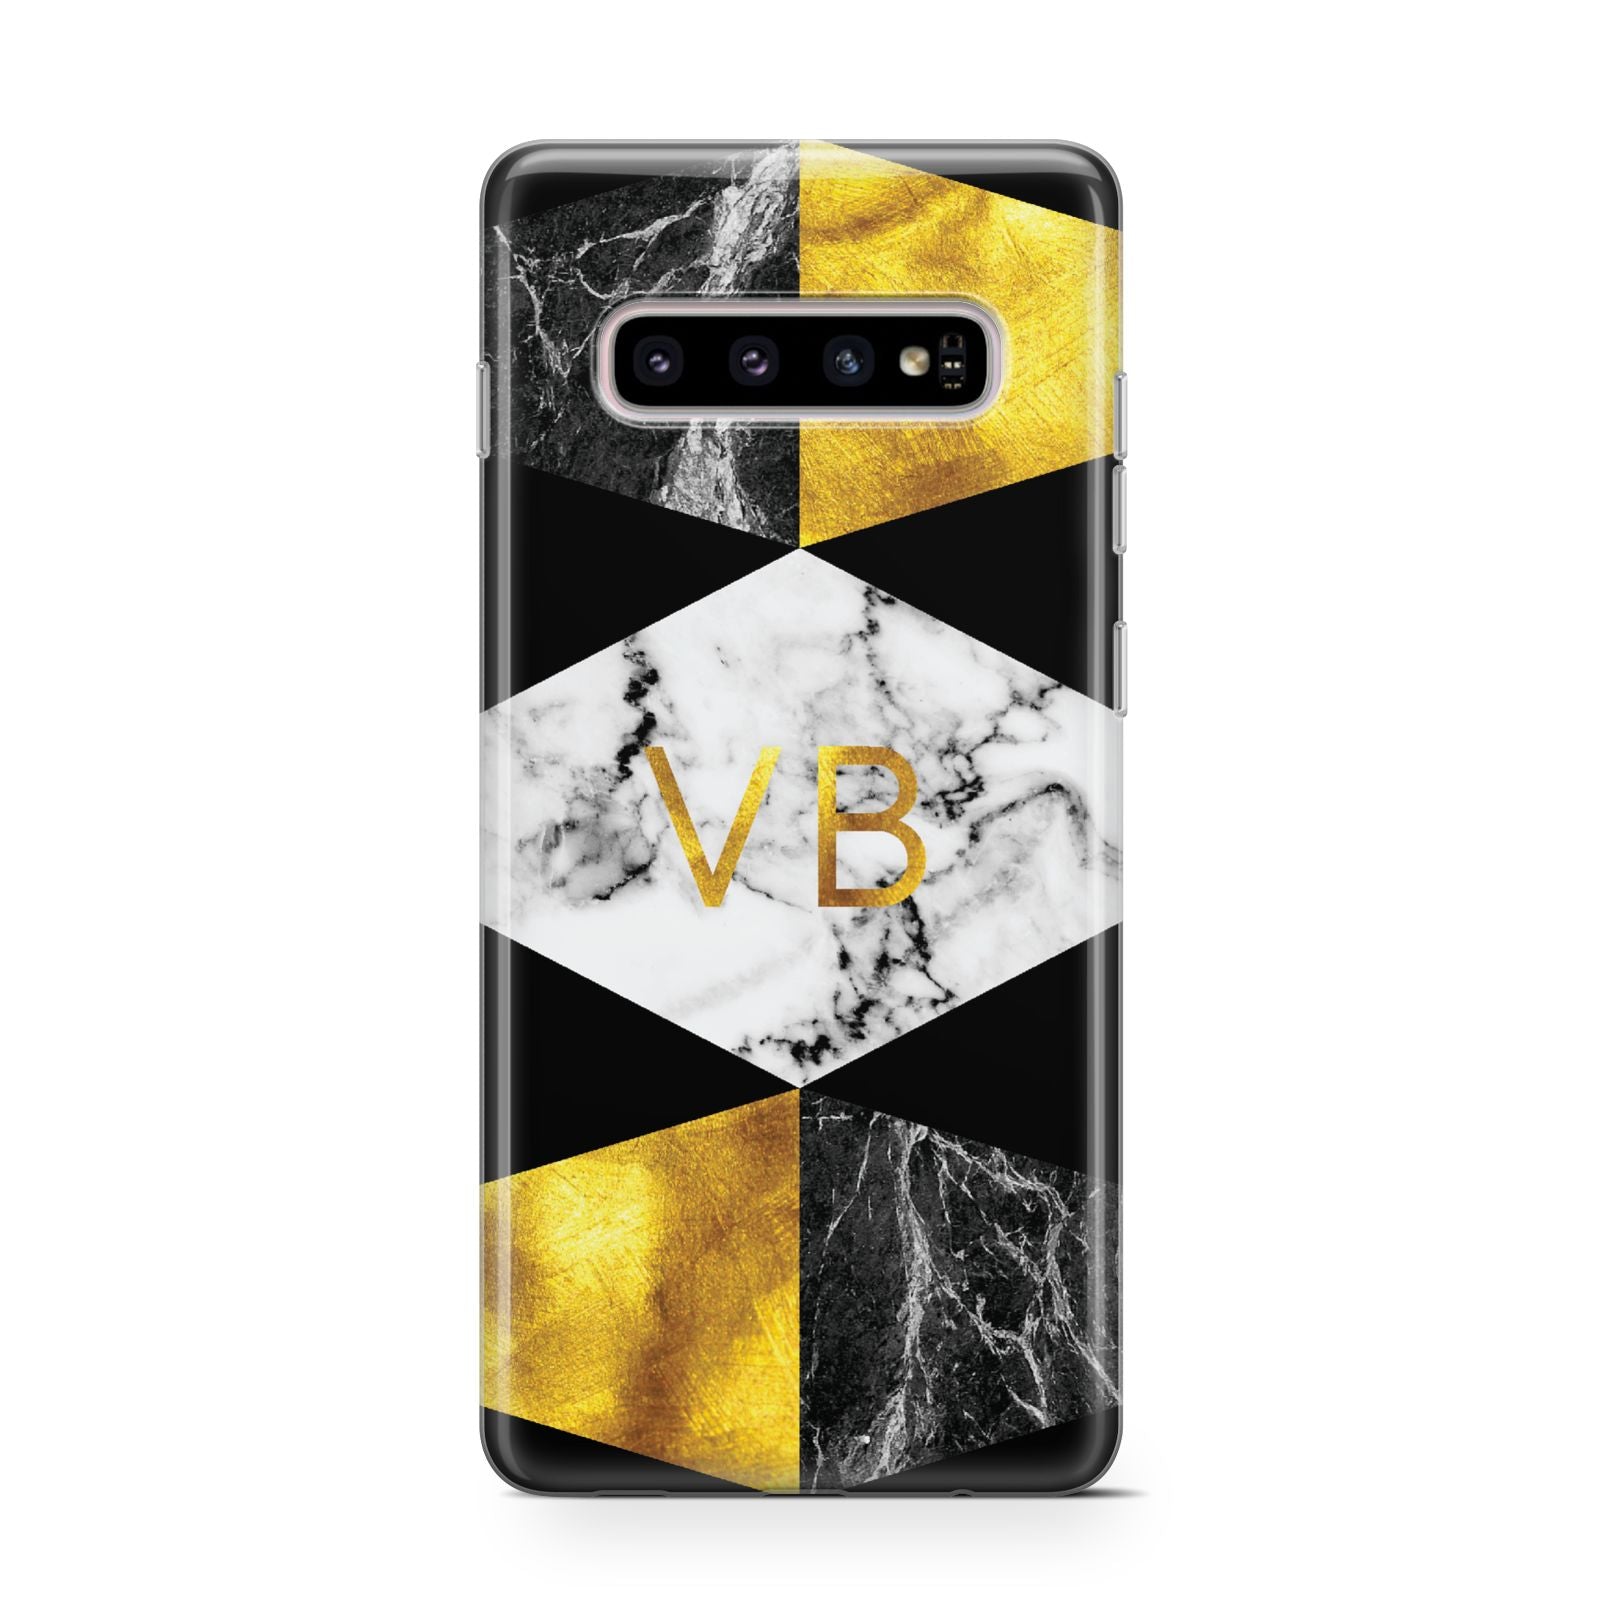 Personalised Gold Marble Initials Samsung Galaxy S10 Case